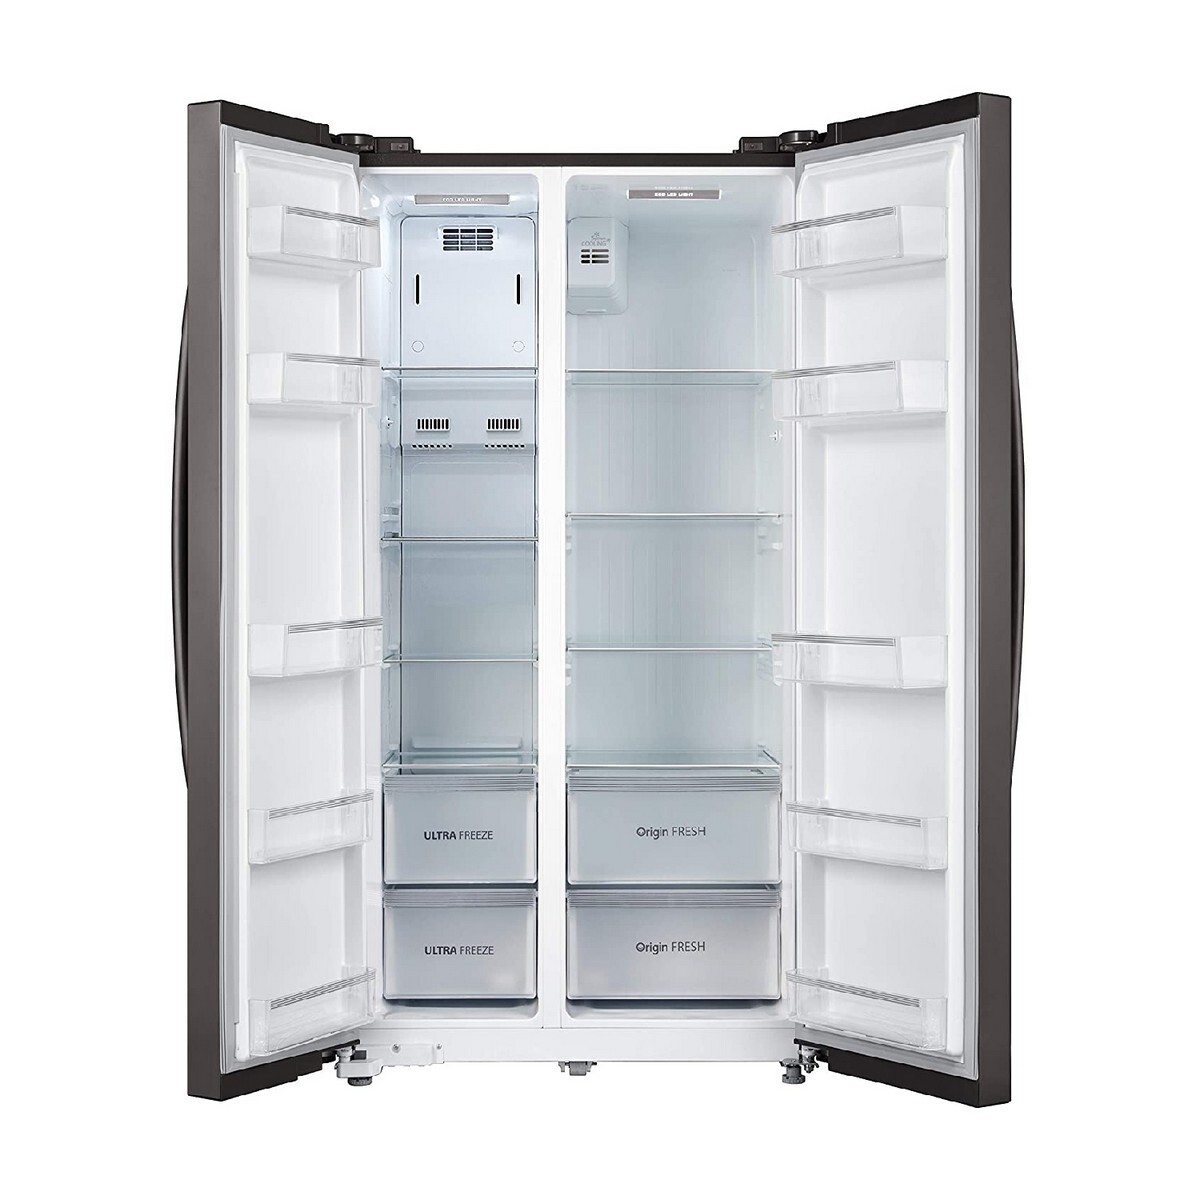 TOSHIBA 587 L with Inverter Side by Side Refrigerator